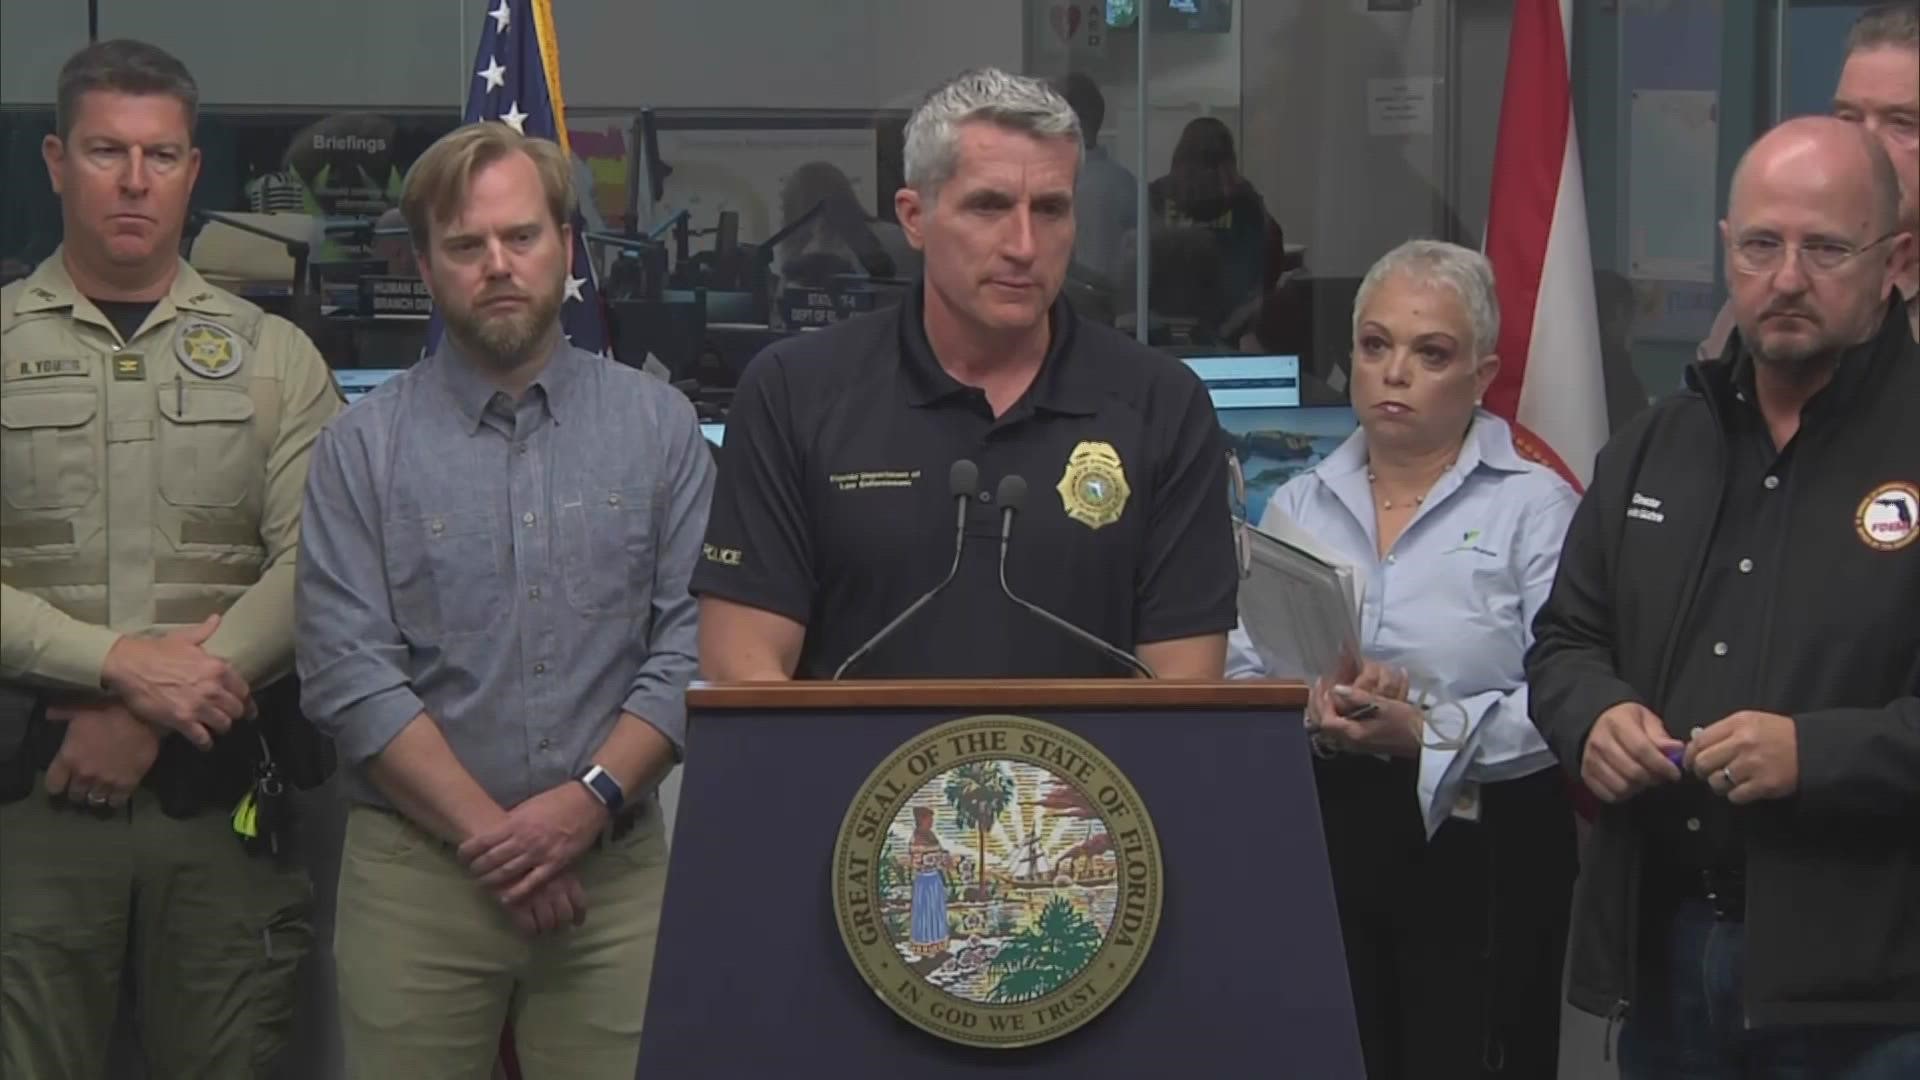 State emergency leaders continue with disaster relief and recovery measures to ensure the safety of Floridians impacted by the storm.